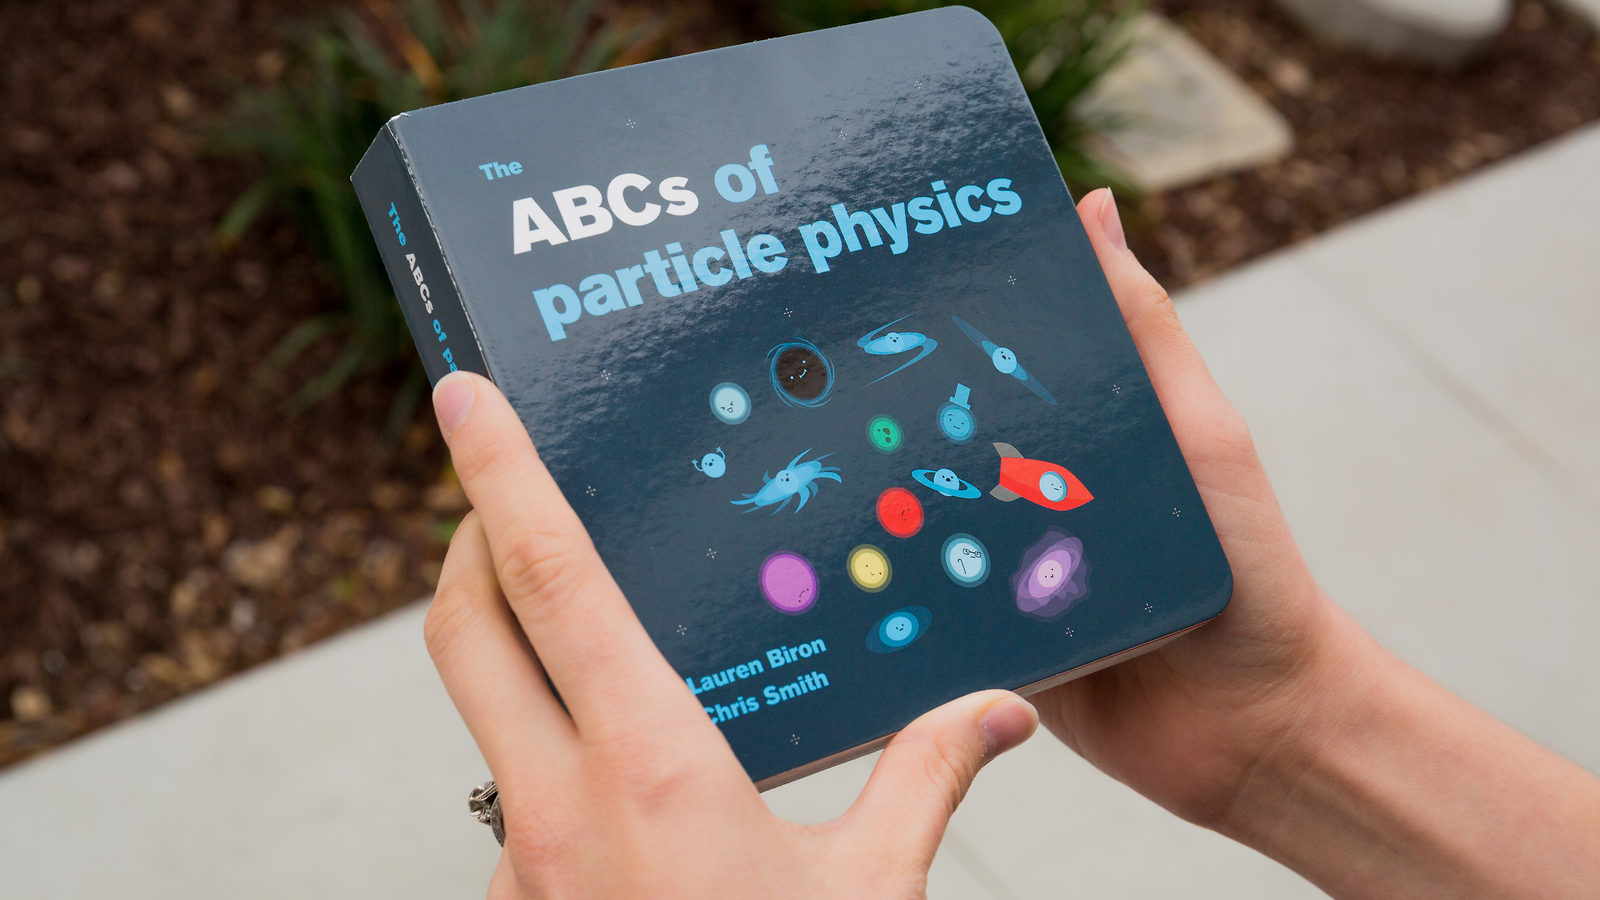 The ABCs of Particle Physics board book